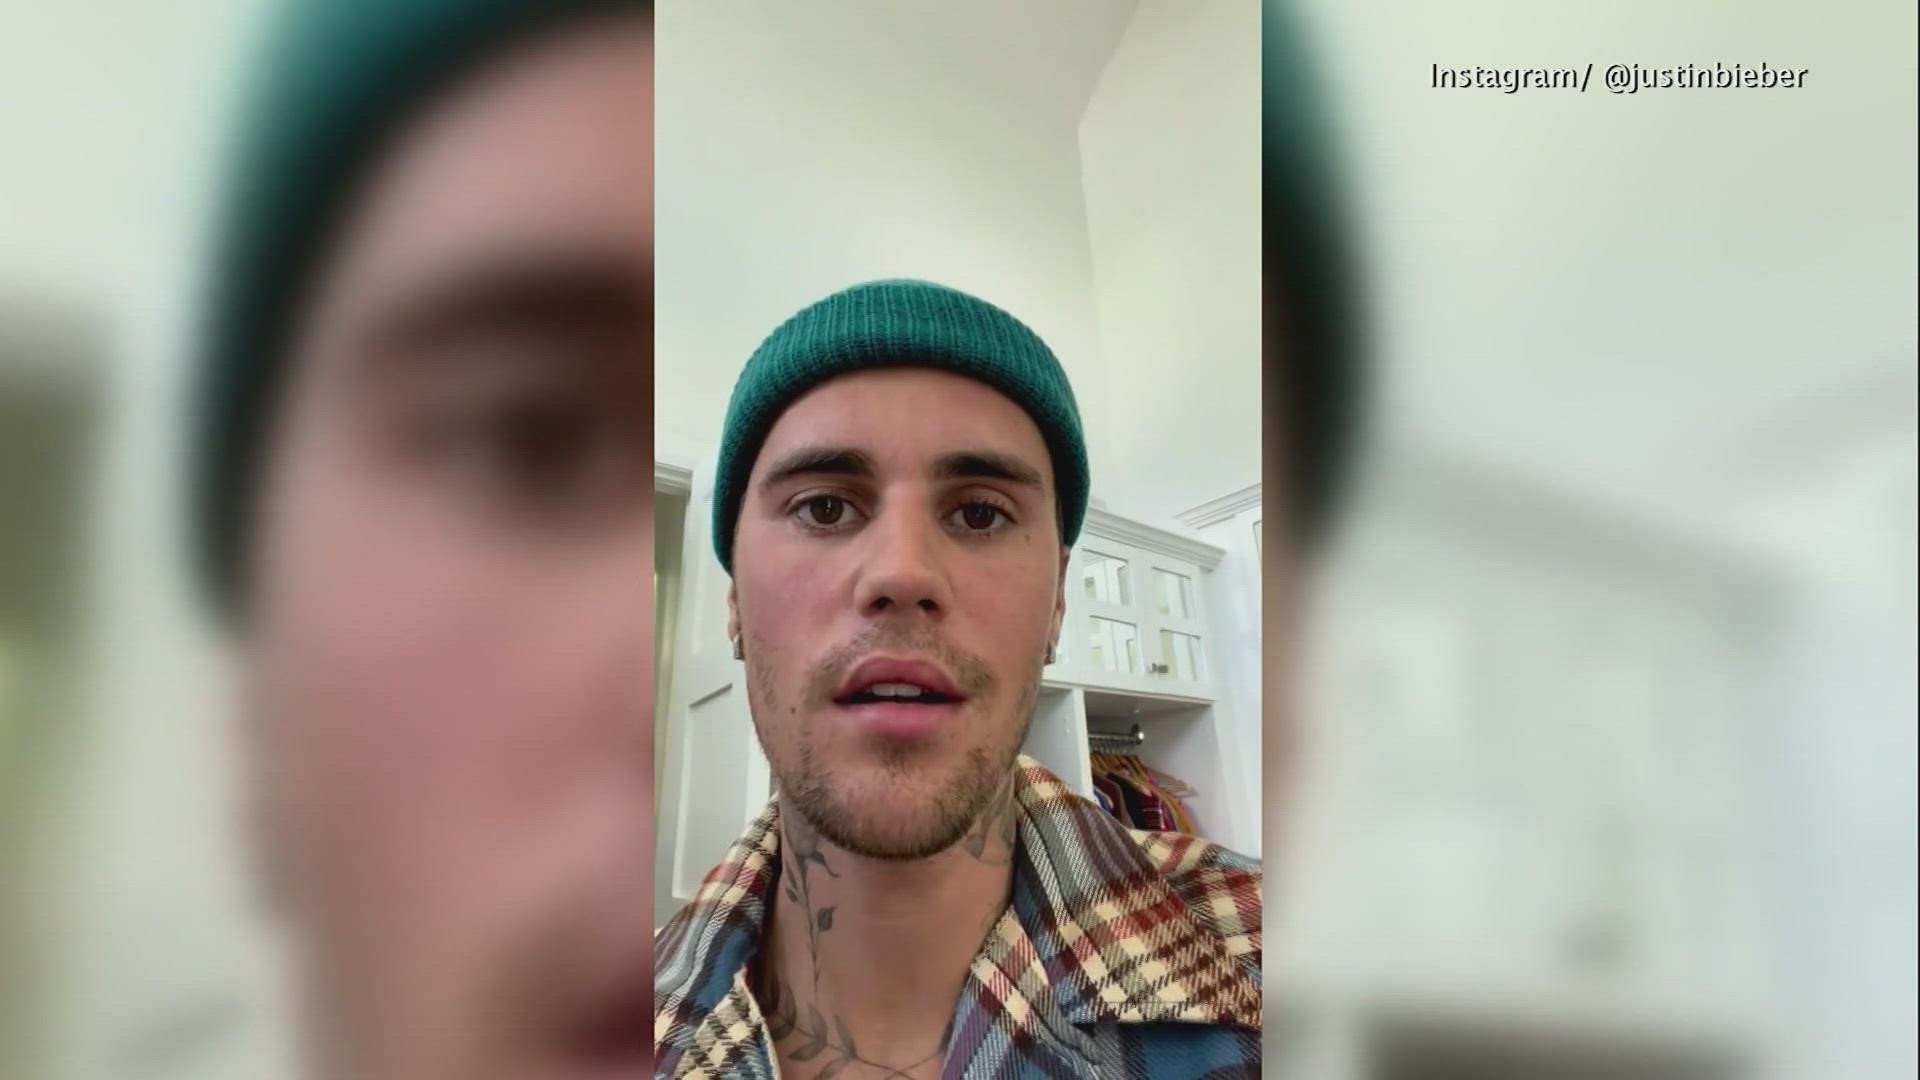 Pop superstar Justin Bieber announced the diagnosis last week, showing how one side of his face is paralyzed now.